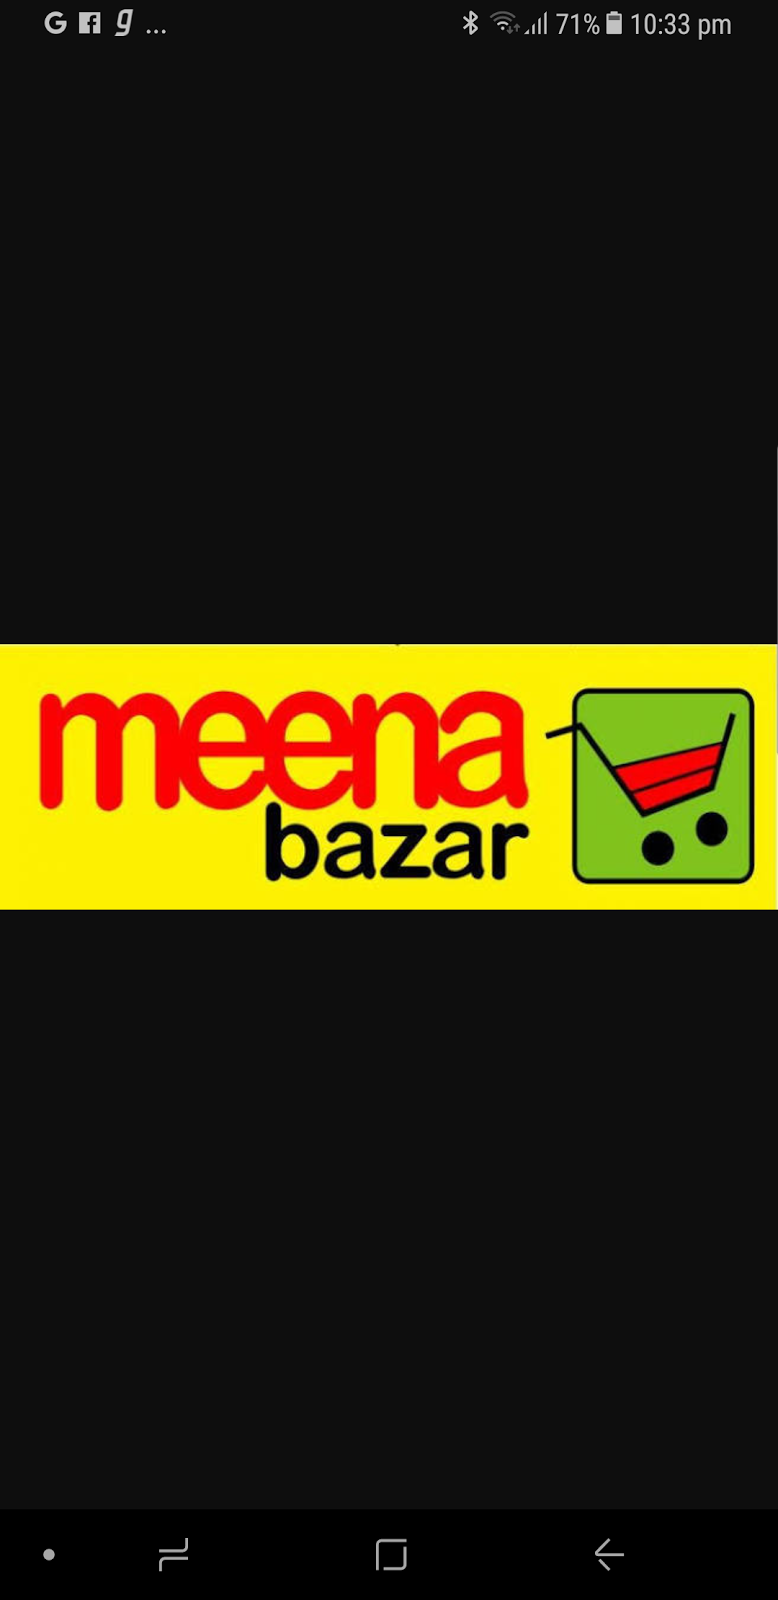 Meena Bazar Butchery And Groceries | store | 52 Saywell Rd, Macquarie Fields NSW 2564, Australia | 0426835625 OR +61 426 835 625